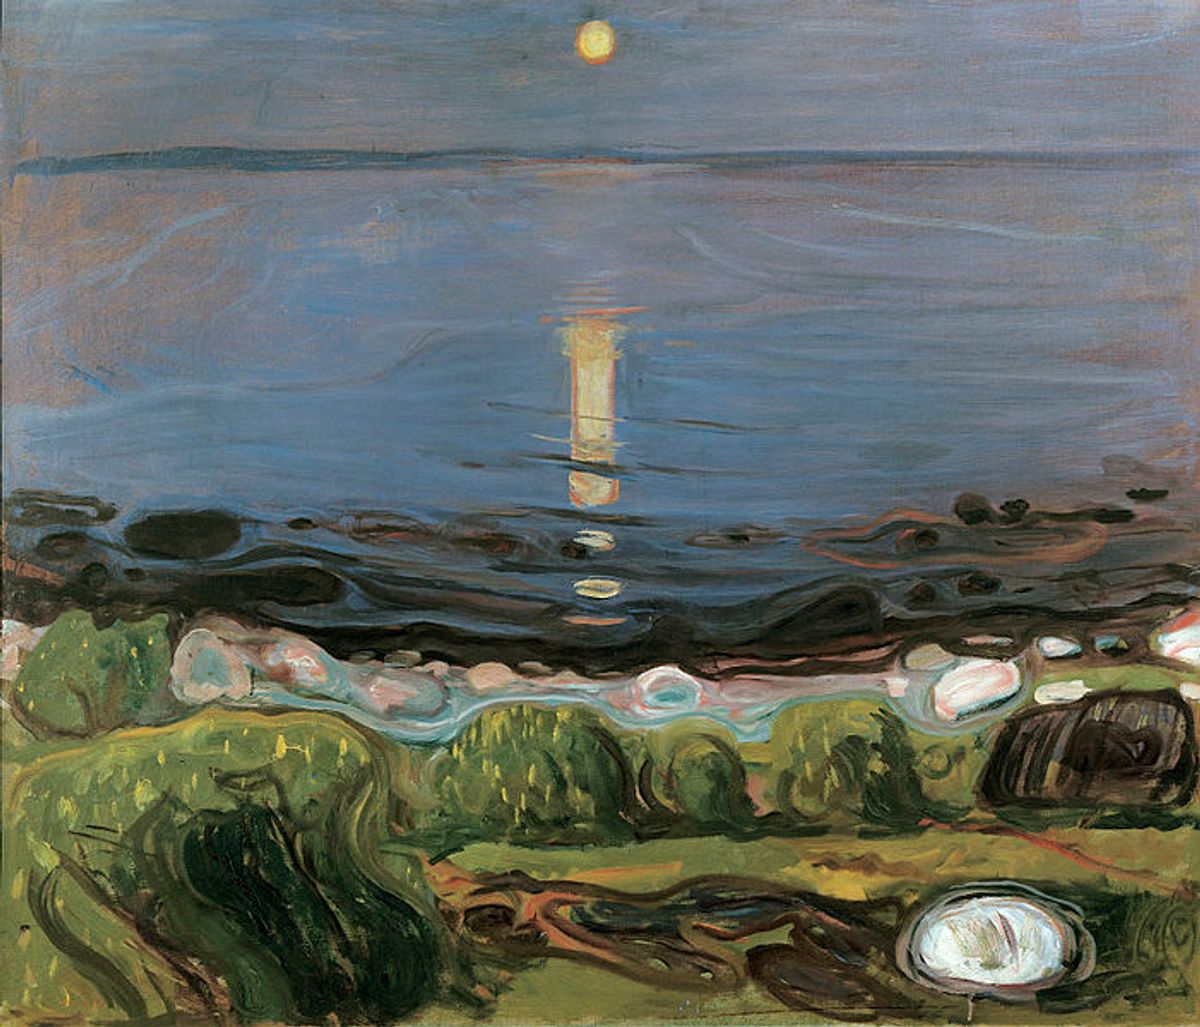 Edvard Munch’s Seascape with moon (summer night on the beach) (1902), once in the collection of Alma Mahler-Werfel, and now in the Österreichische National Galerie, Vienna 